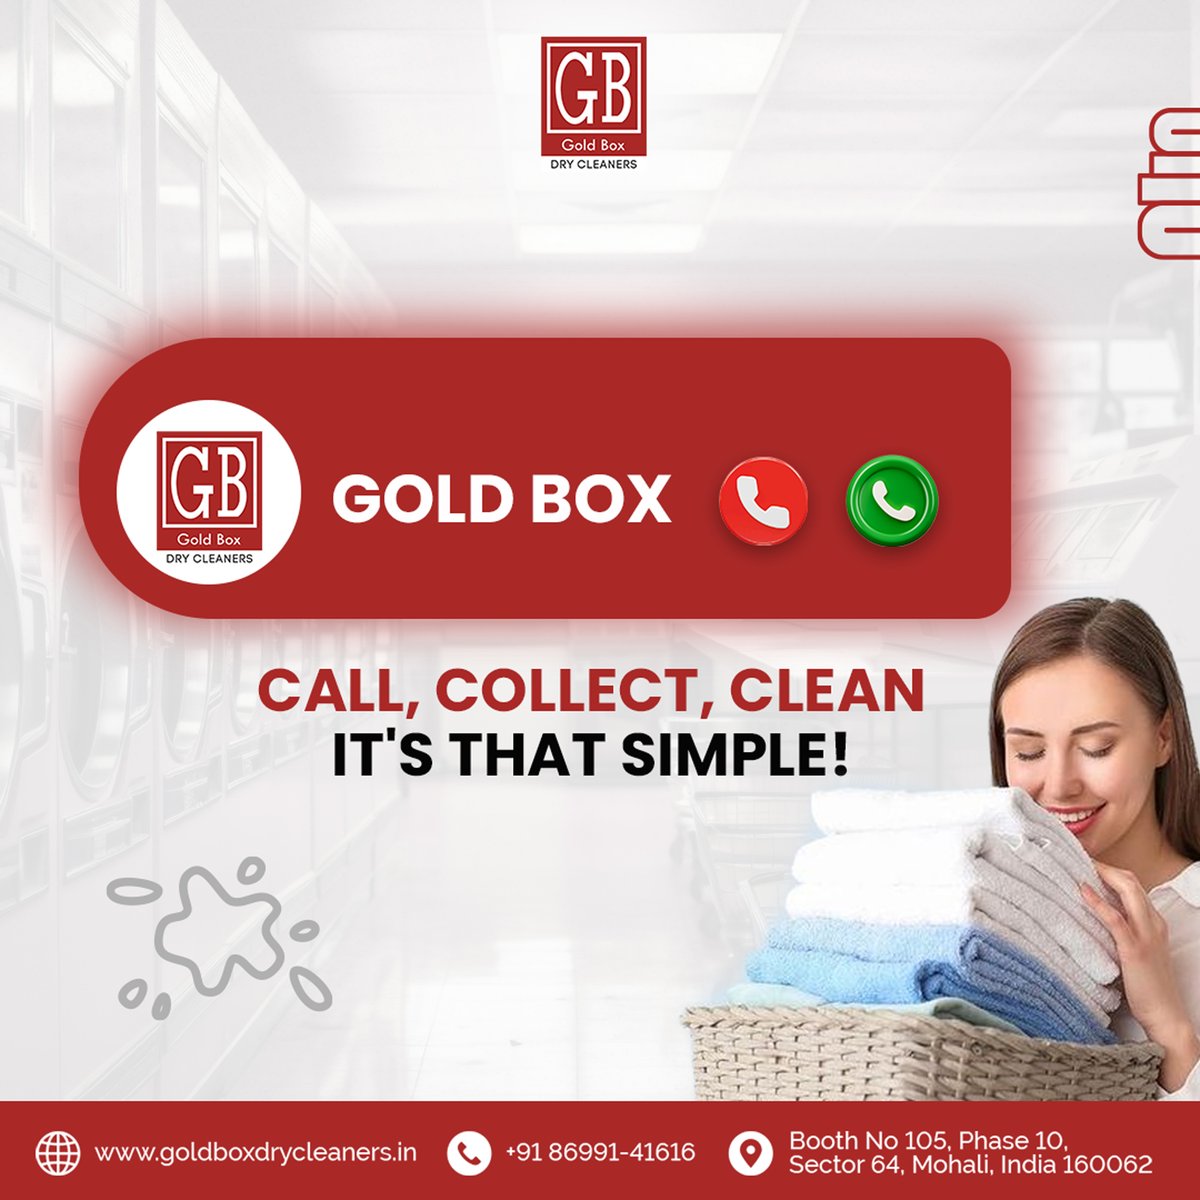 ☎️🚗✨ Call, Collect, Clean – it's as easy as 1-2-3!

☎️ 8699141616 📍 goldboxdrycleaners.in
#GoldBoxLuxuryCare #BusinessImageUpgrade #CommercialDryCleaning #ProfessionalCleaningServices #DryCleaningExperts #QualityService #PickupAndDelivery #LuxuryCleaning #Mohali #Chandigarh